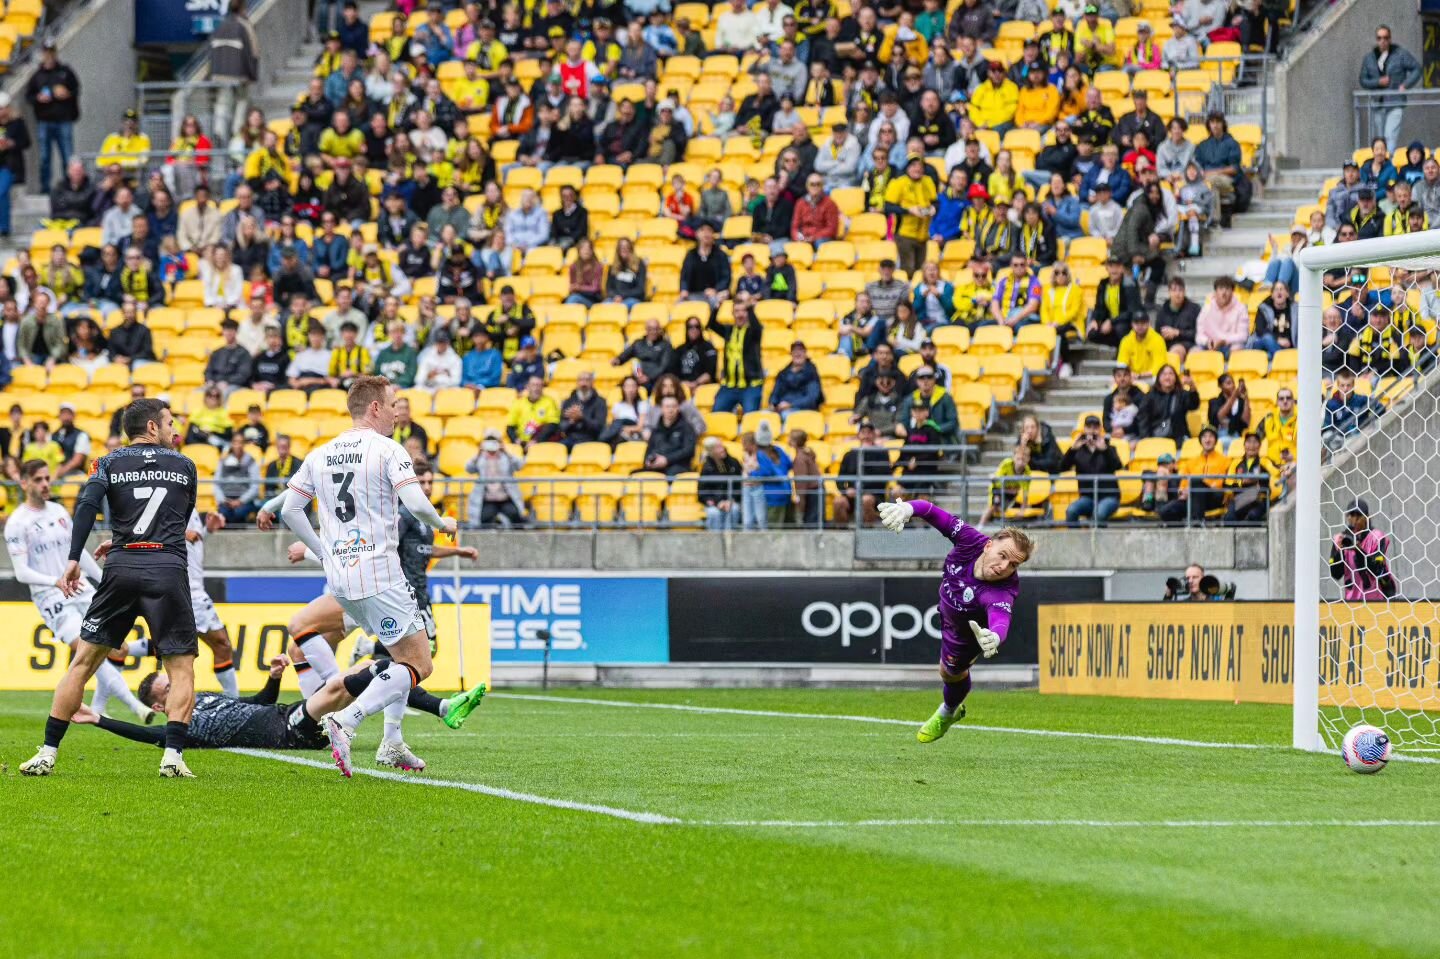 Photo highlights from today's A-League clash between league leaders Wellington Phoenix and Brisbane Roar.

The Phoenix did not disappoint their fans as they gave them an easter present to remember after Bozhidar Kraev opened the scoring inside 76 sec